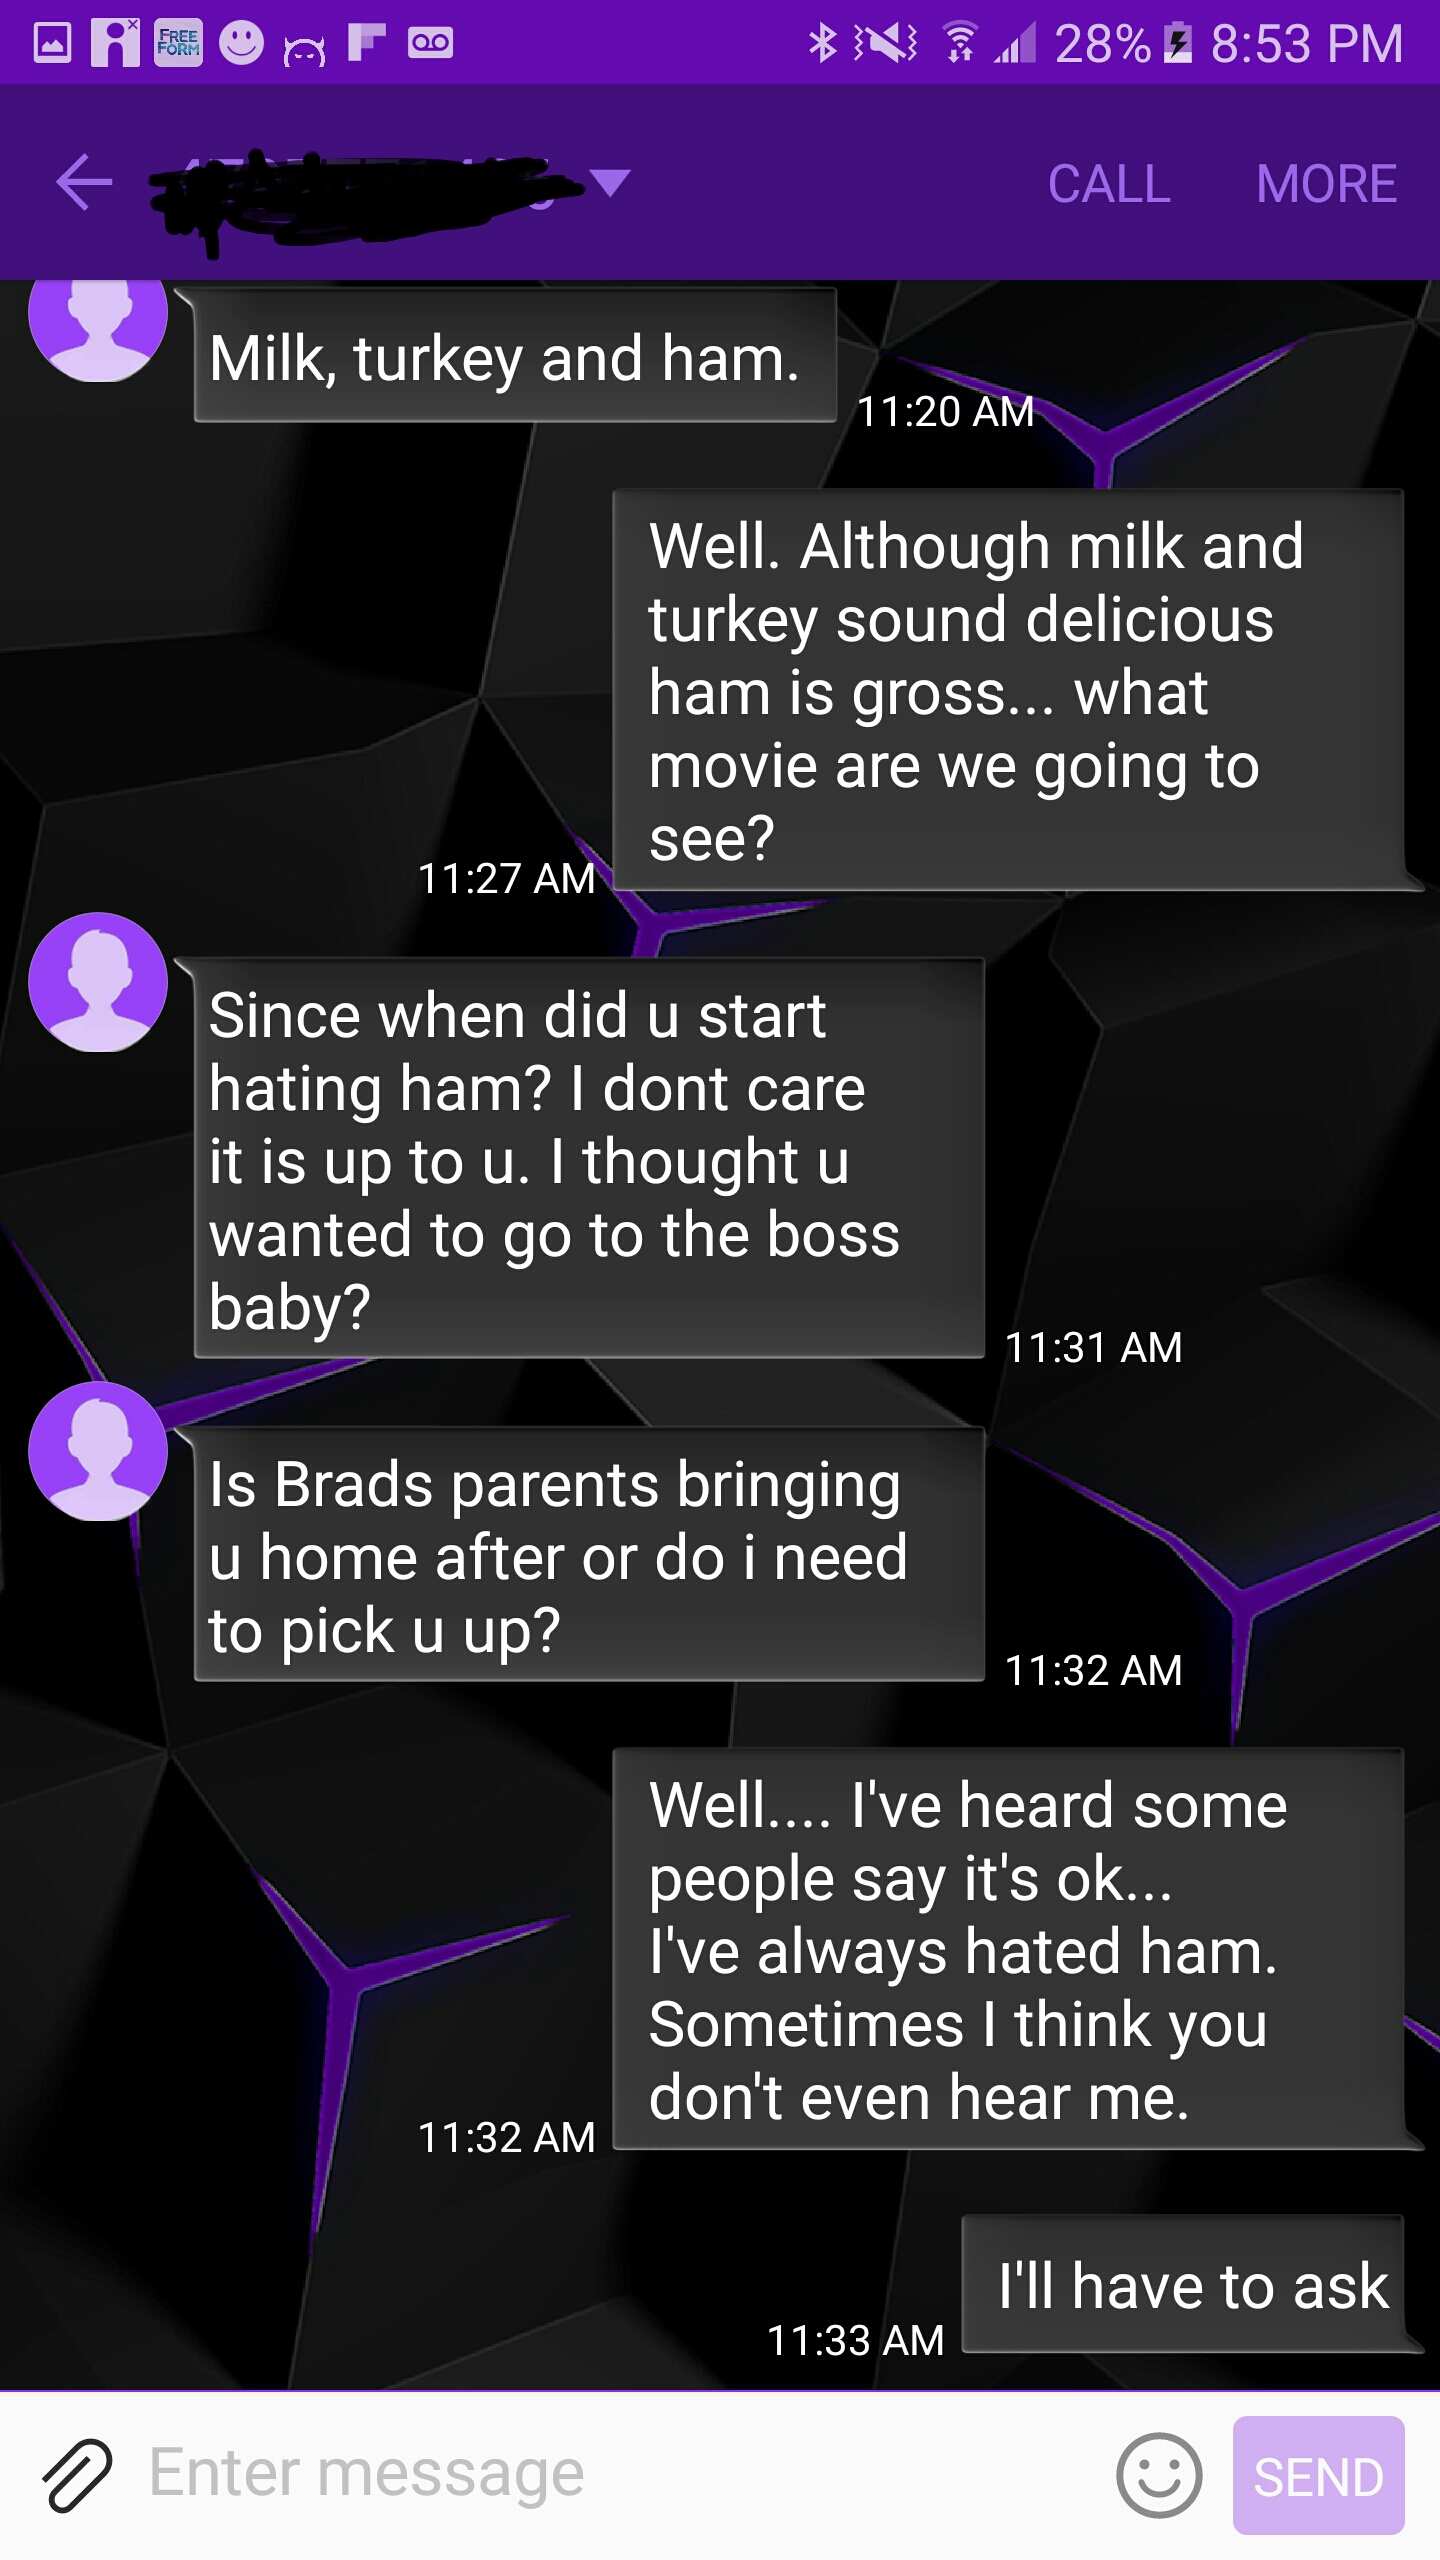 Mom Texts Wrong Number And Gets Taken For A Wild Ride